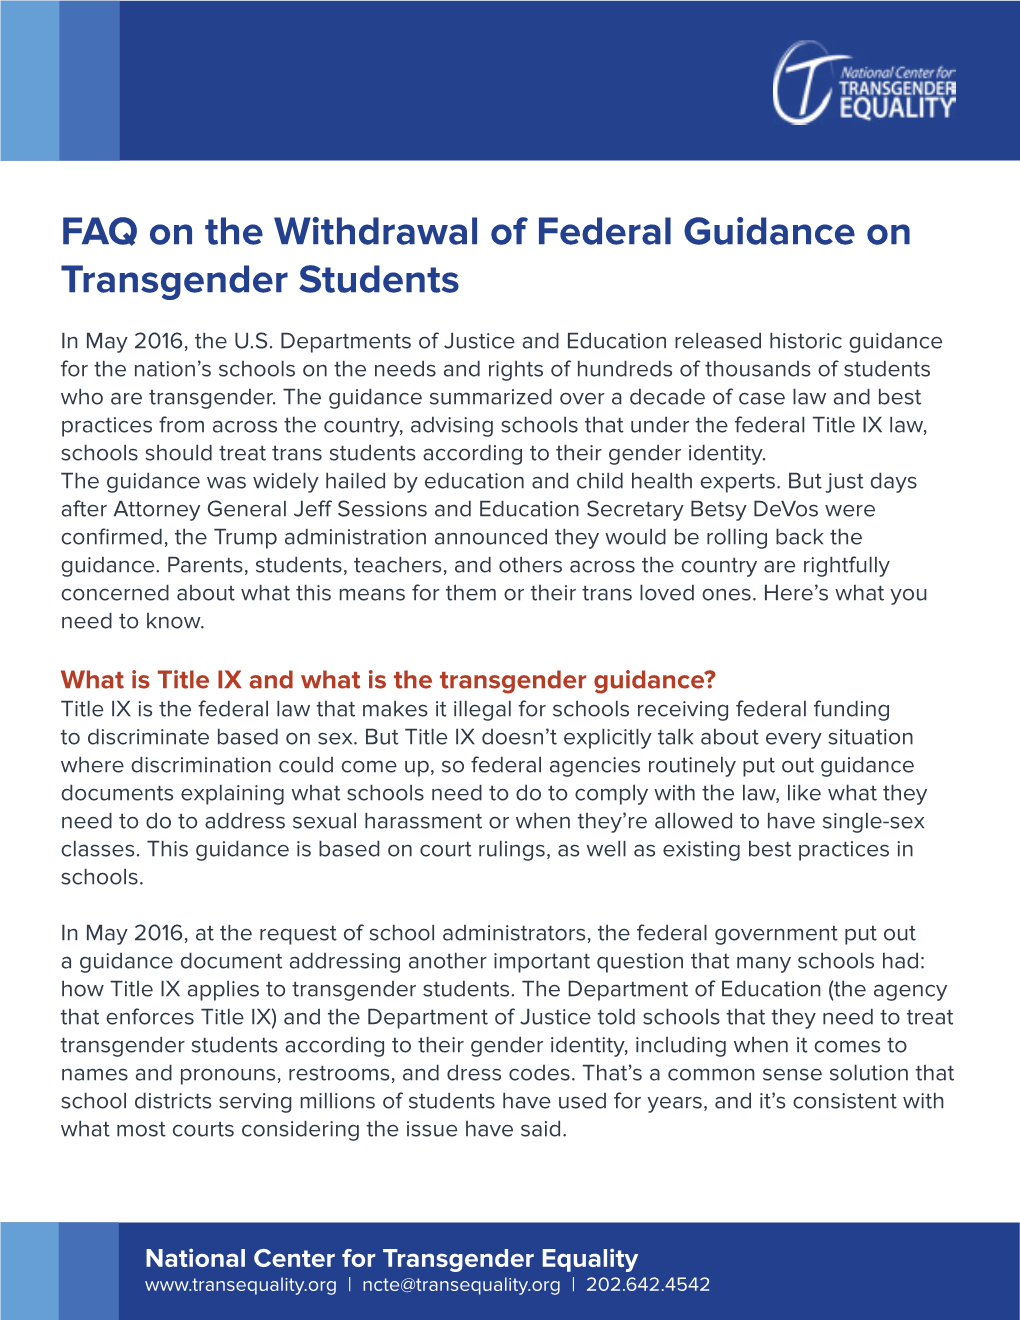 FAQ on the Withdrawal of Federal Guidance on Transgender Students